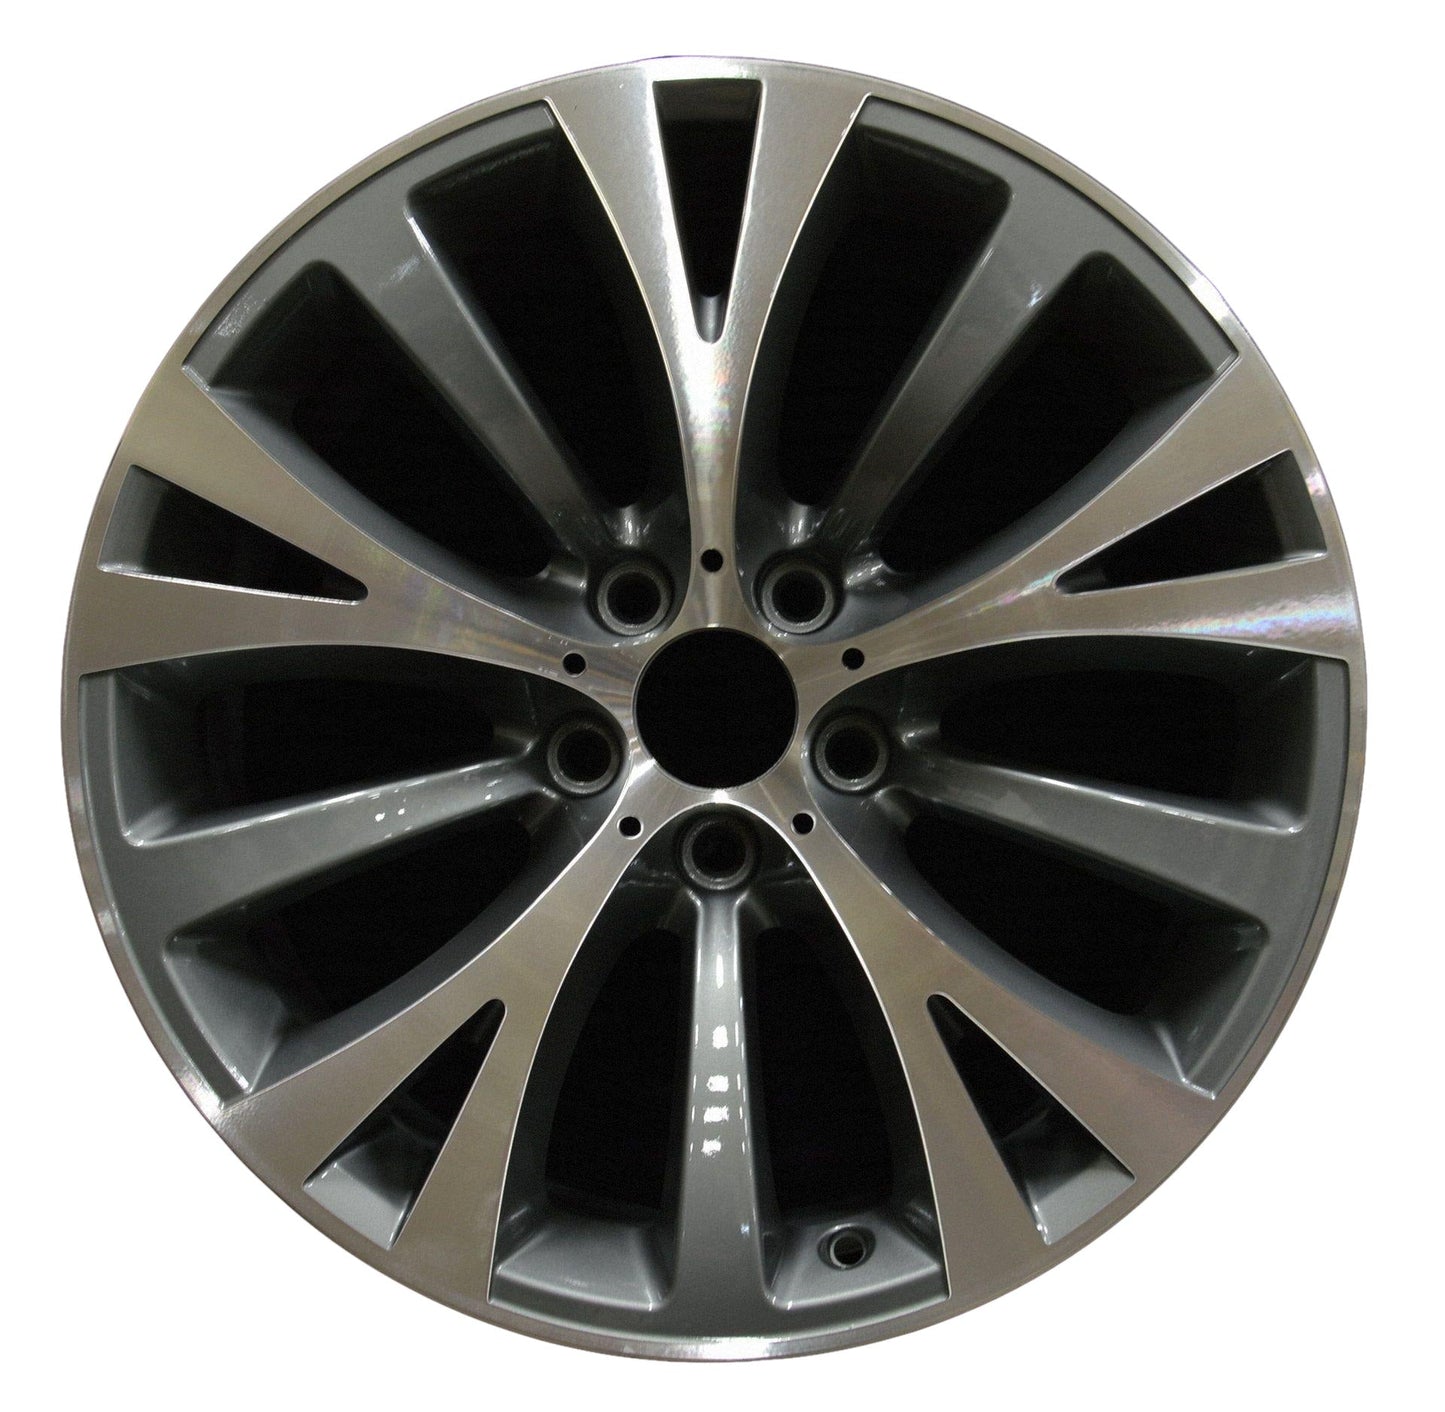 BMW 535i GT  2010, 2011, 2012, 2013, 2014, 2015, 2016, 2017 Factory OEM Car Wheel Size 19x8.5 Alloy WAO.71369FT.LC15.MA